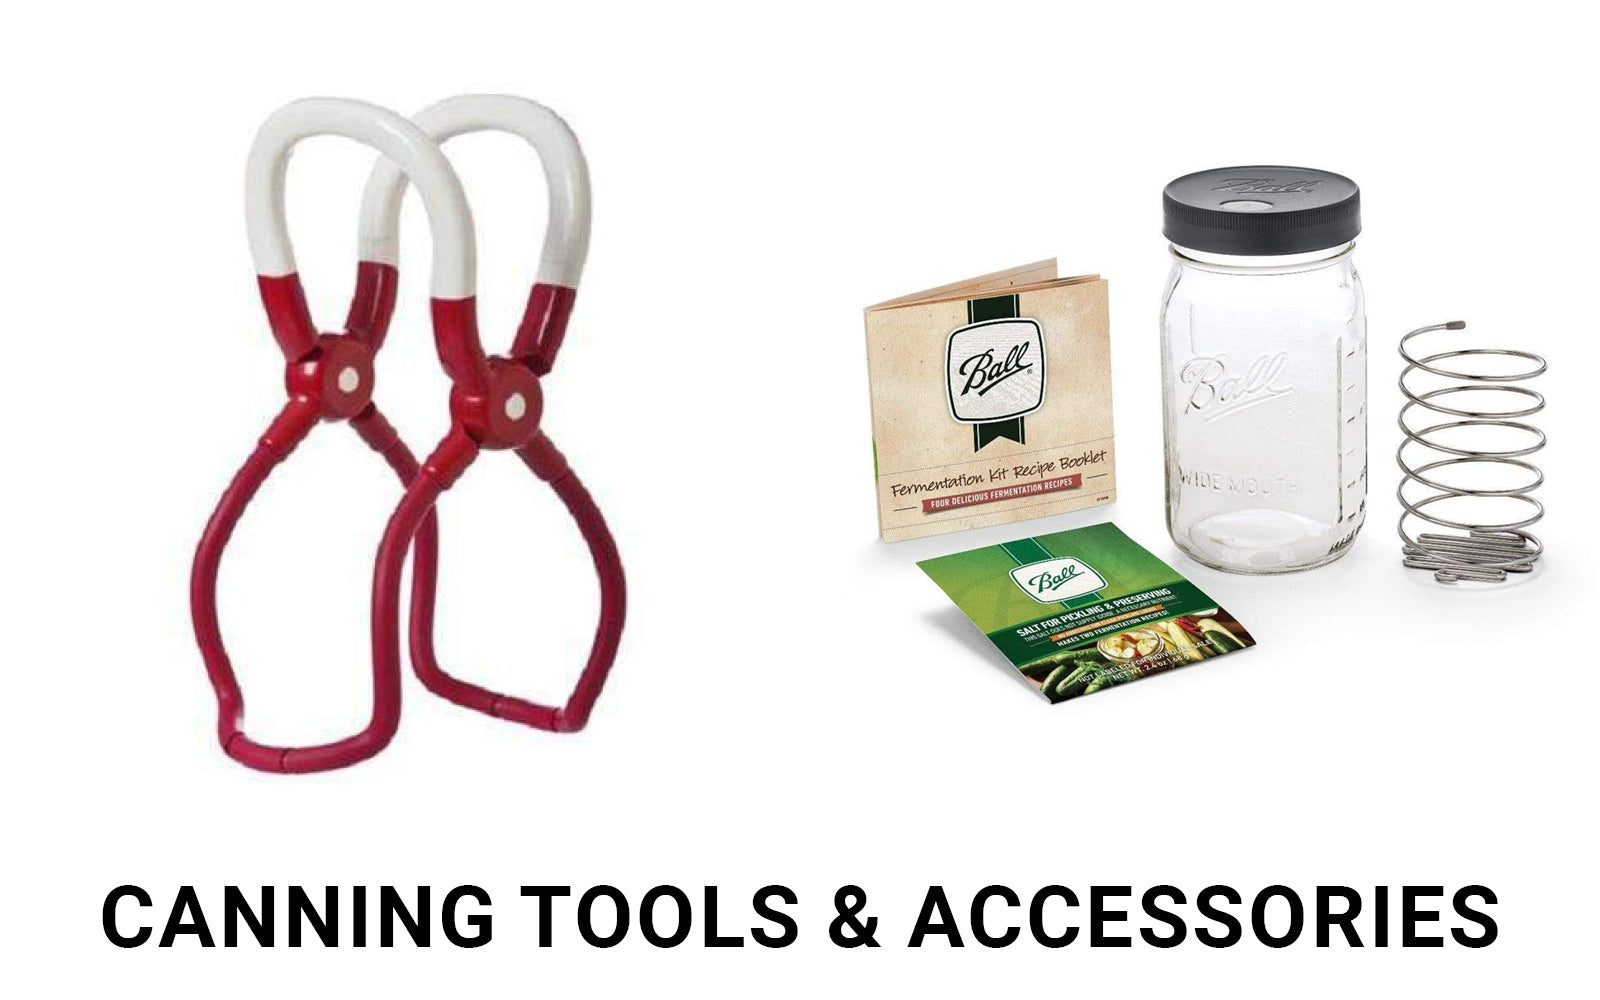 Canning Tools & Accessories